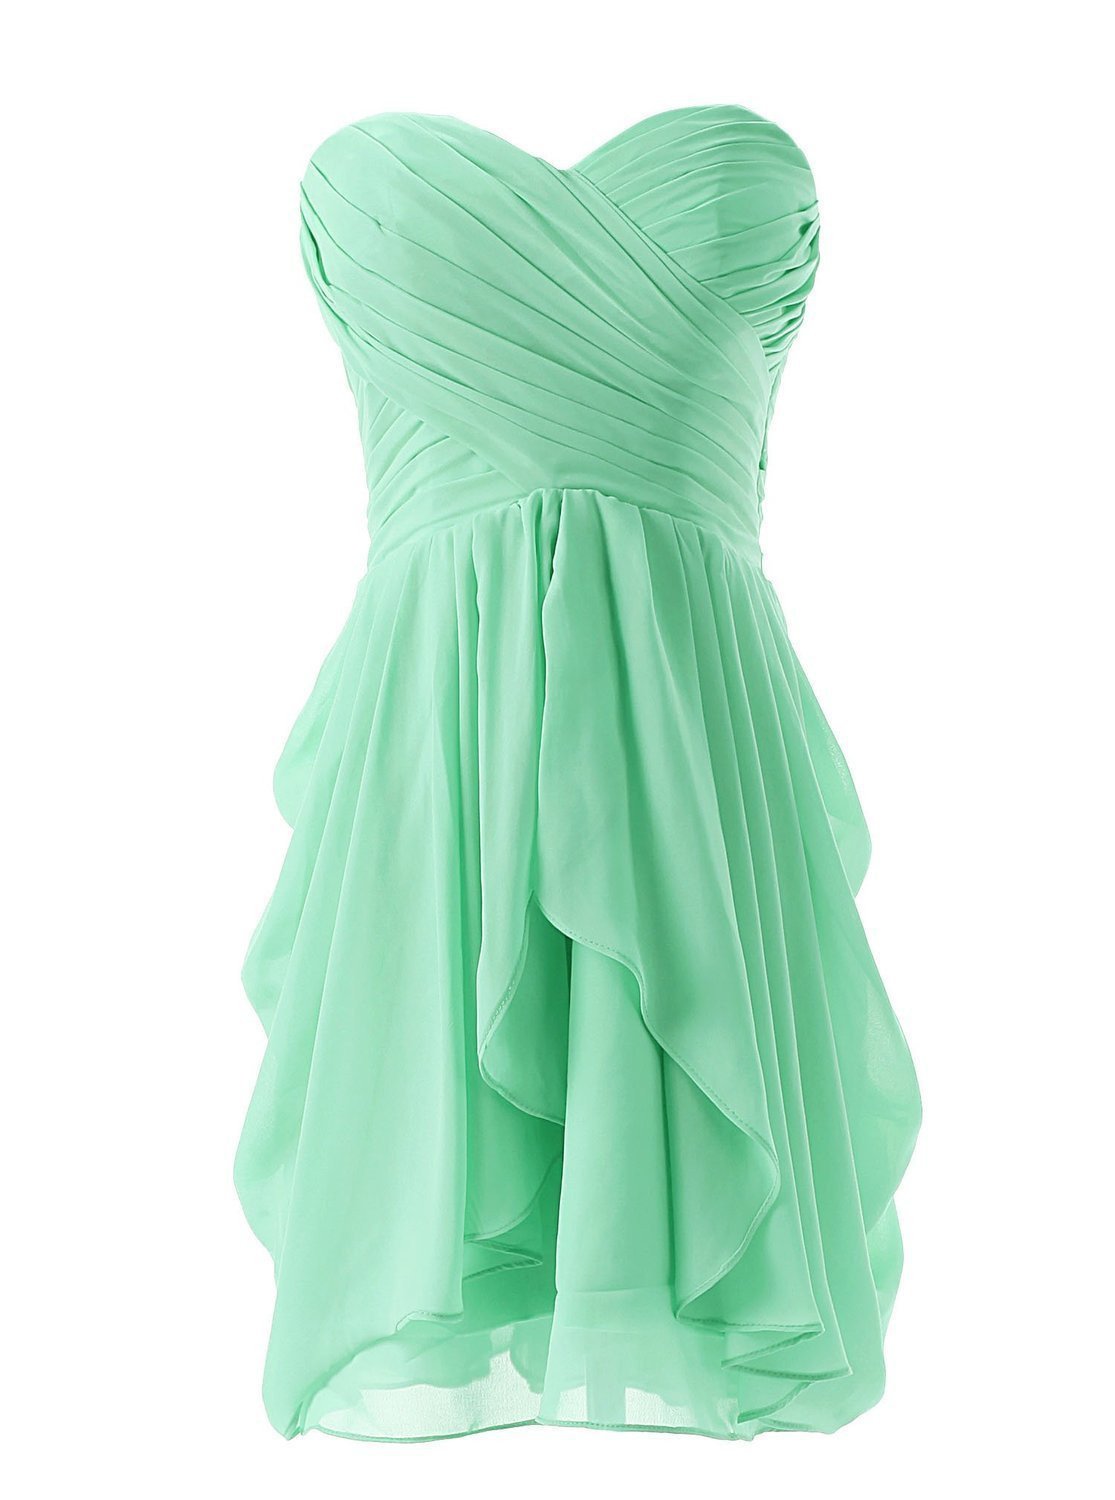 Sterpless Solid Color Irregular Ruffles Homecoming Party Dress - Meet Yours Fashion - 2